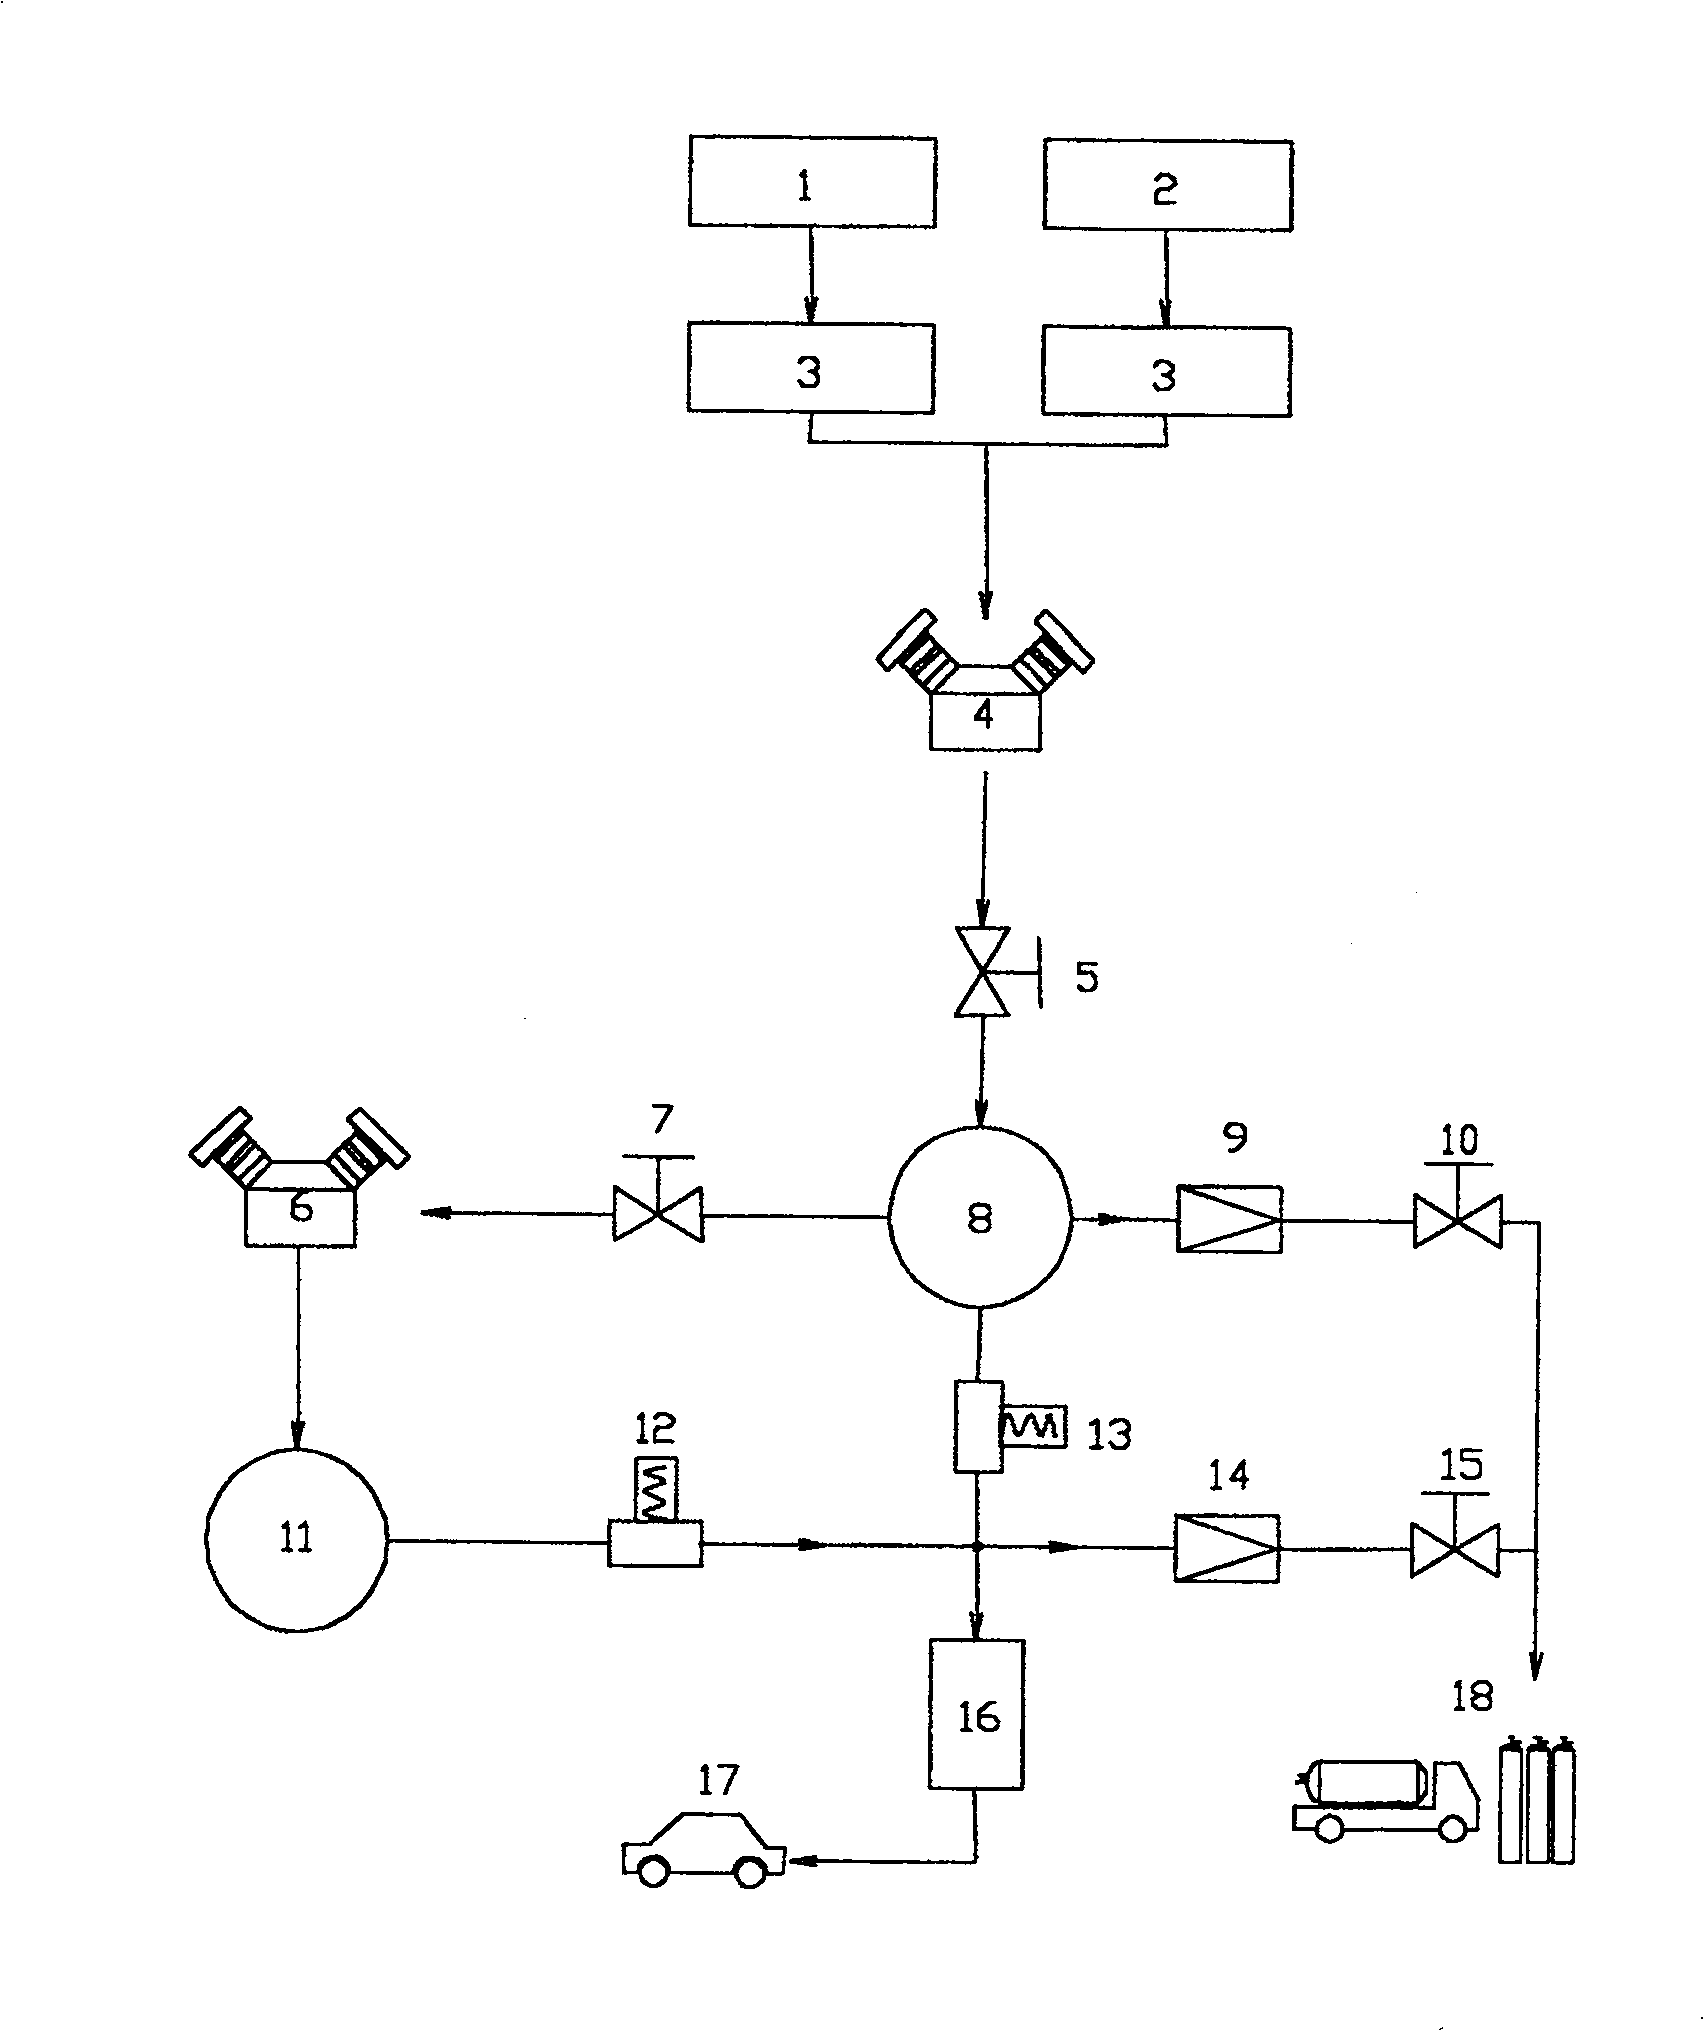 Hydrogen generating and refilling system and method capable of refilling hydrogen fast